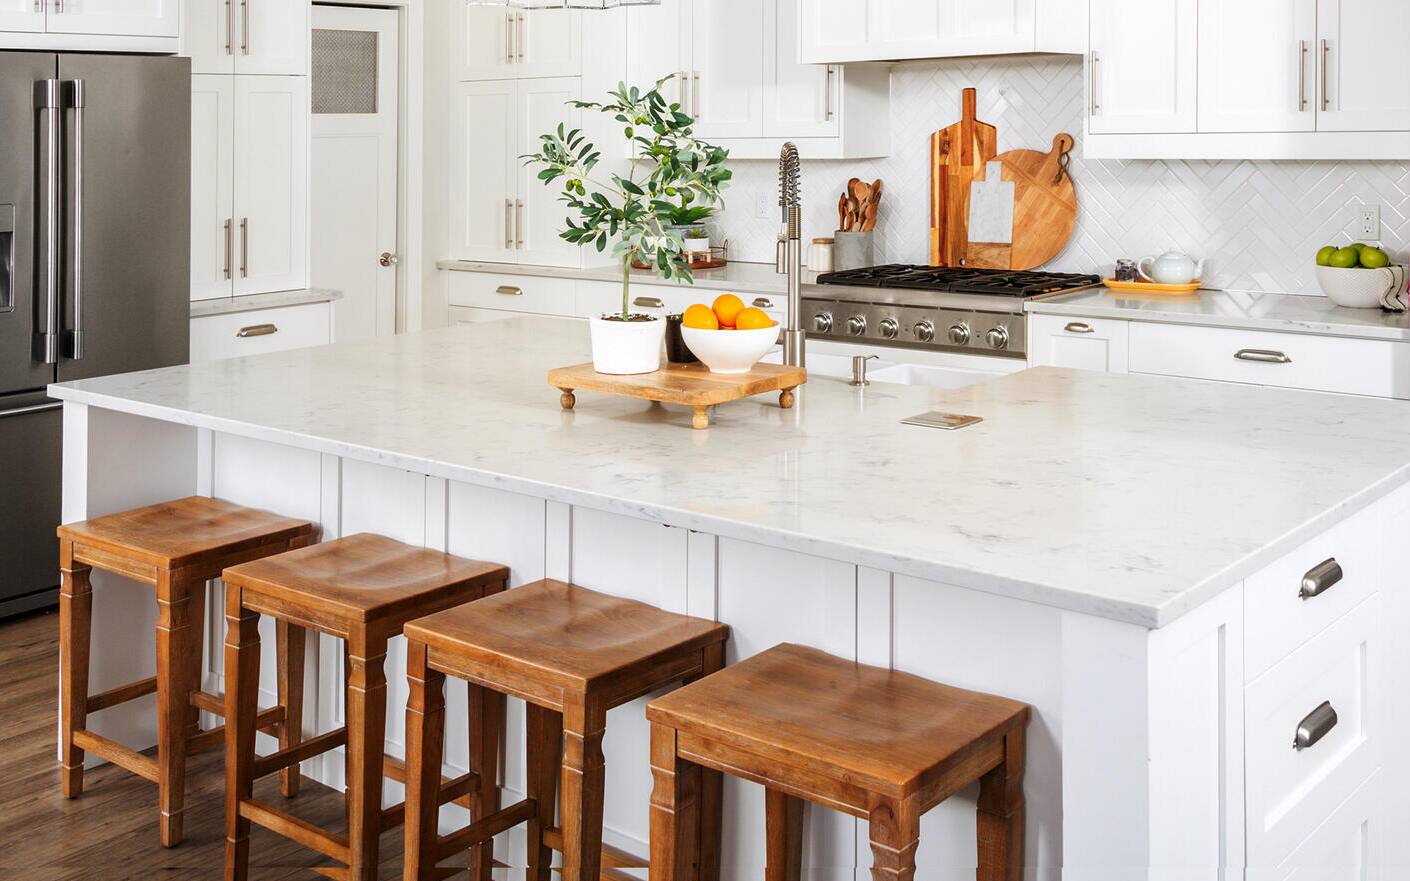 6 Best Countertop Materials for Kitchens